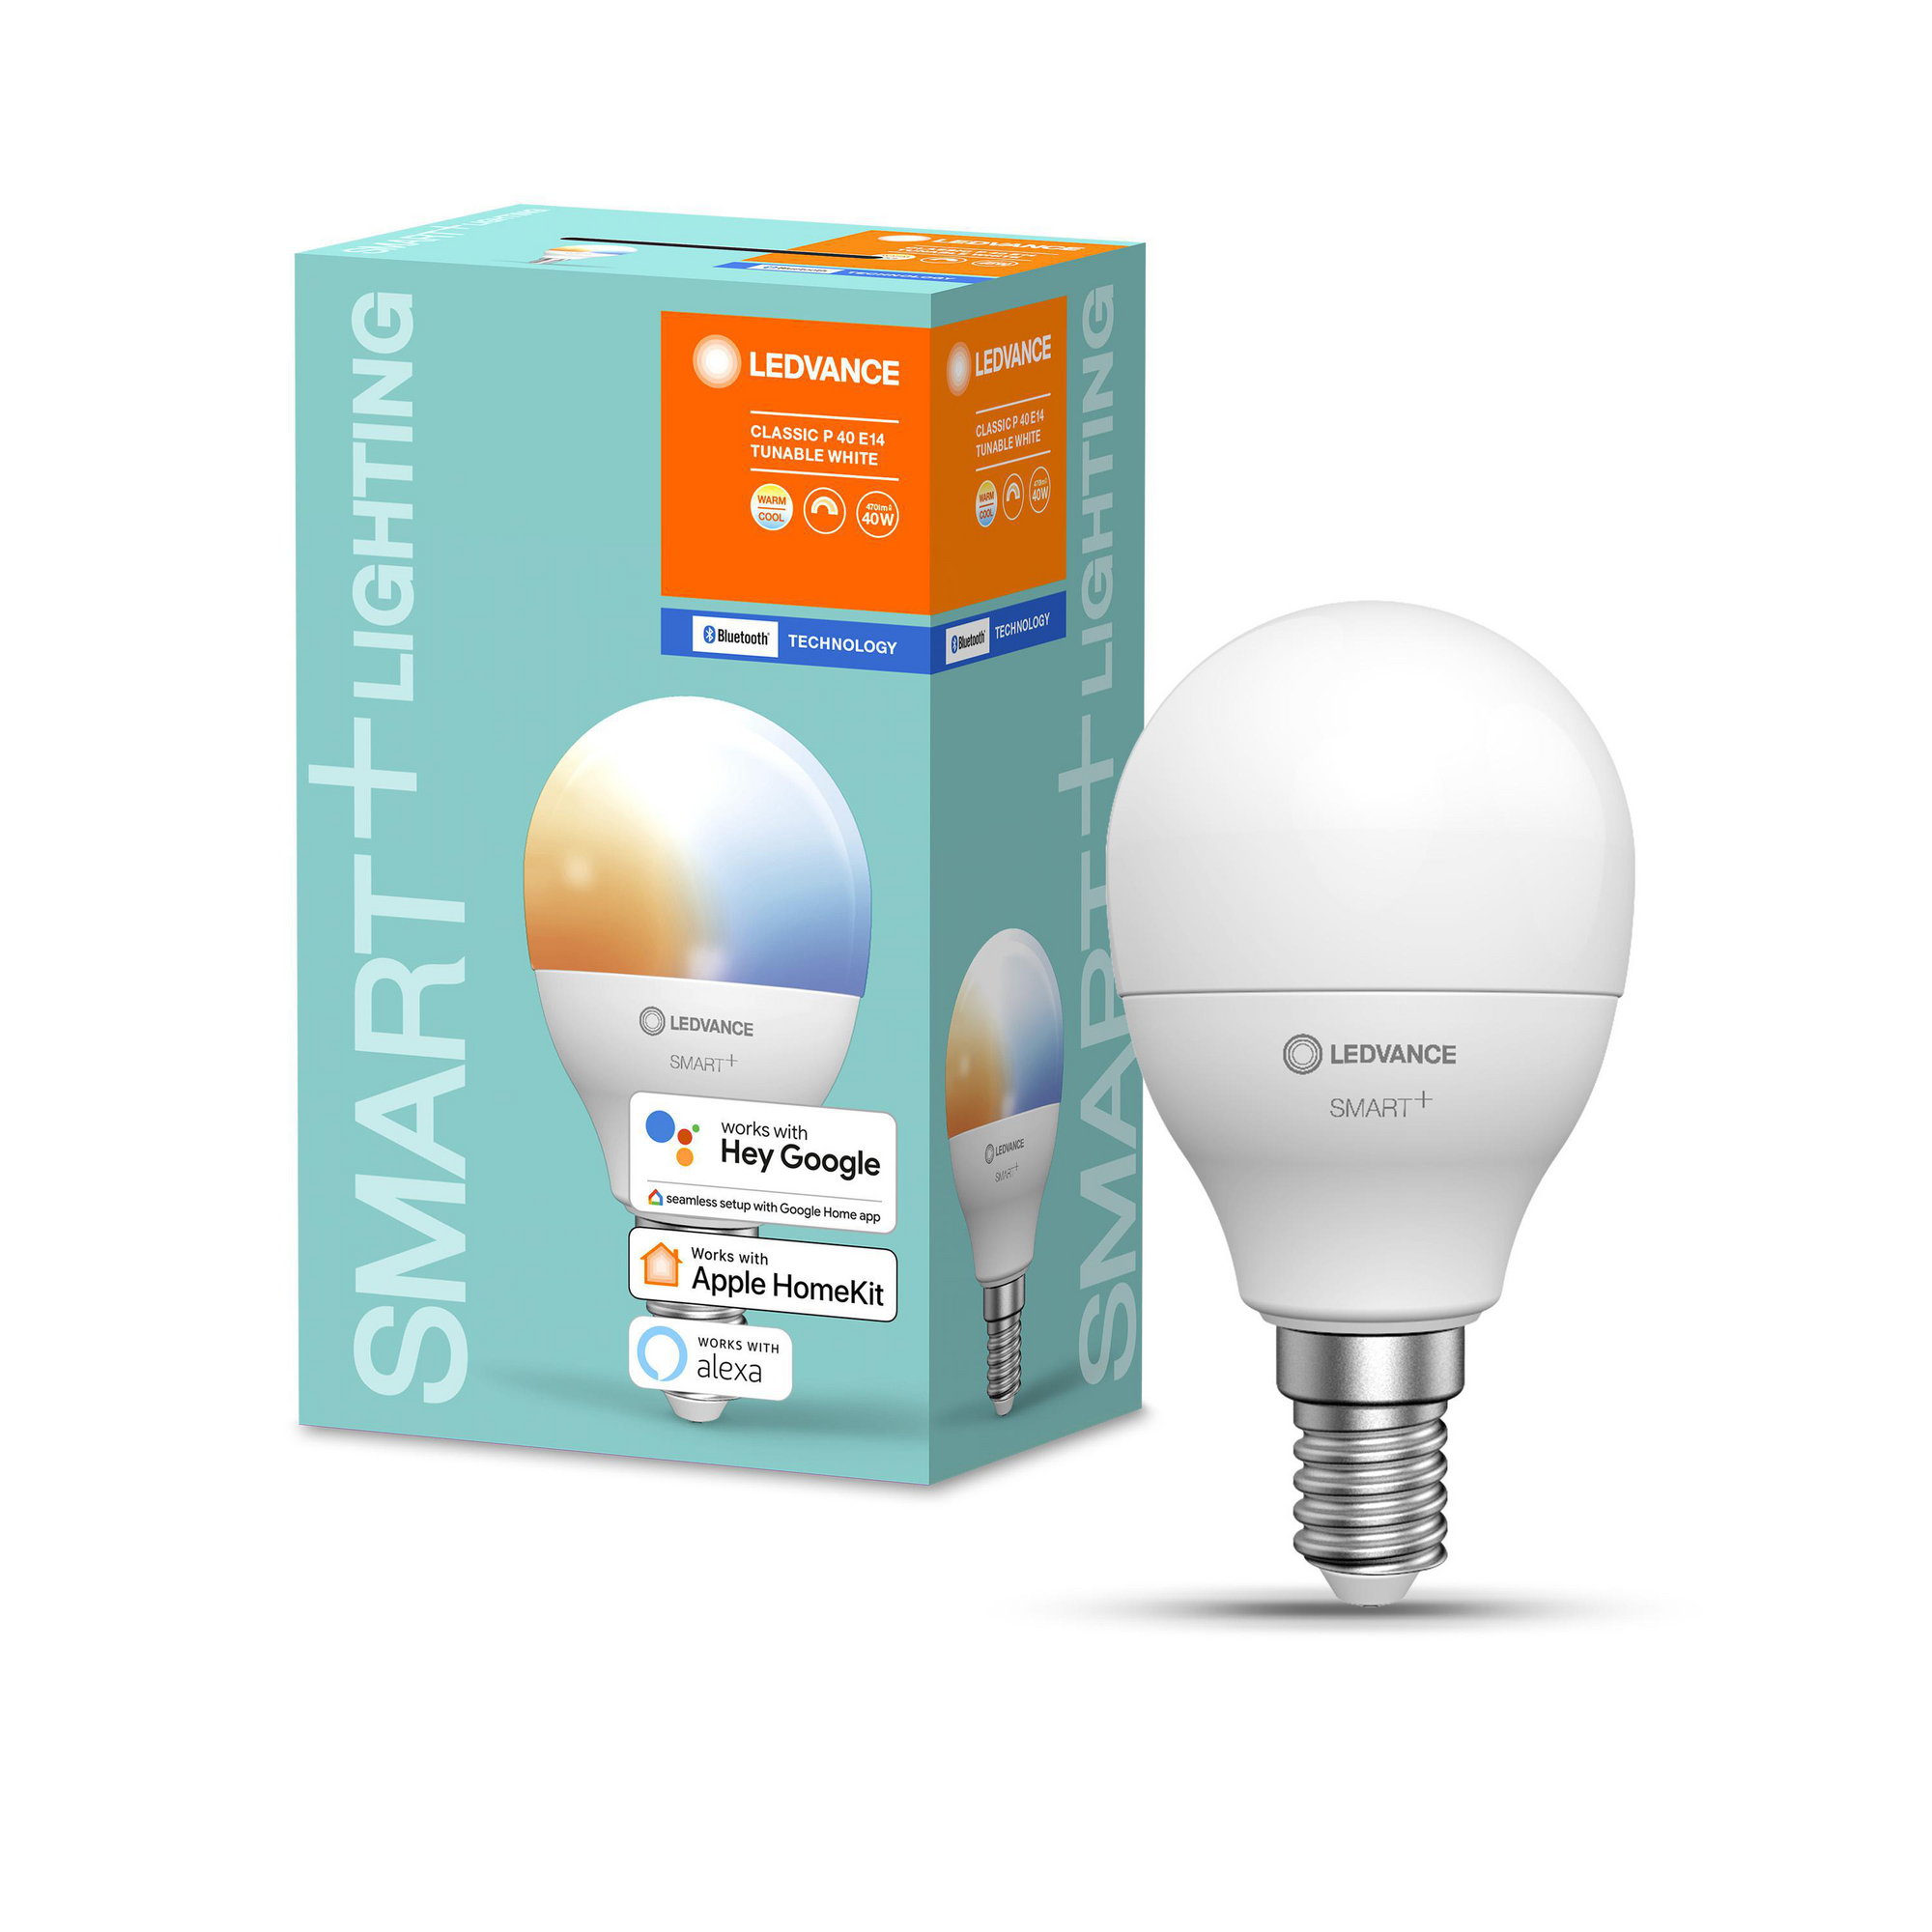 LED-Lampe 'Smart+' 7,8 cm 470 lm 5 W E14 weiß Bluetooth Tunable White + product picture